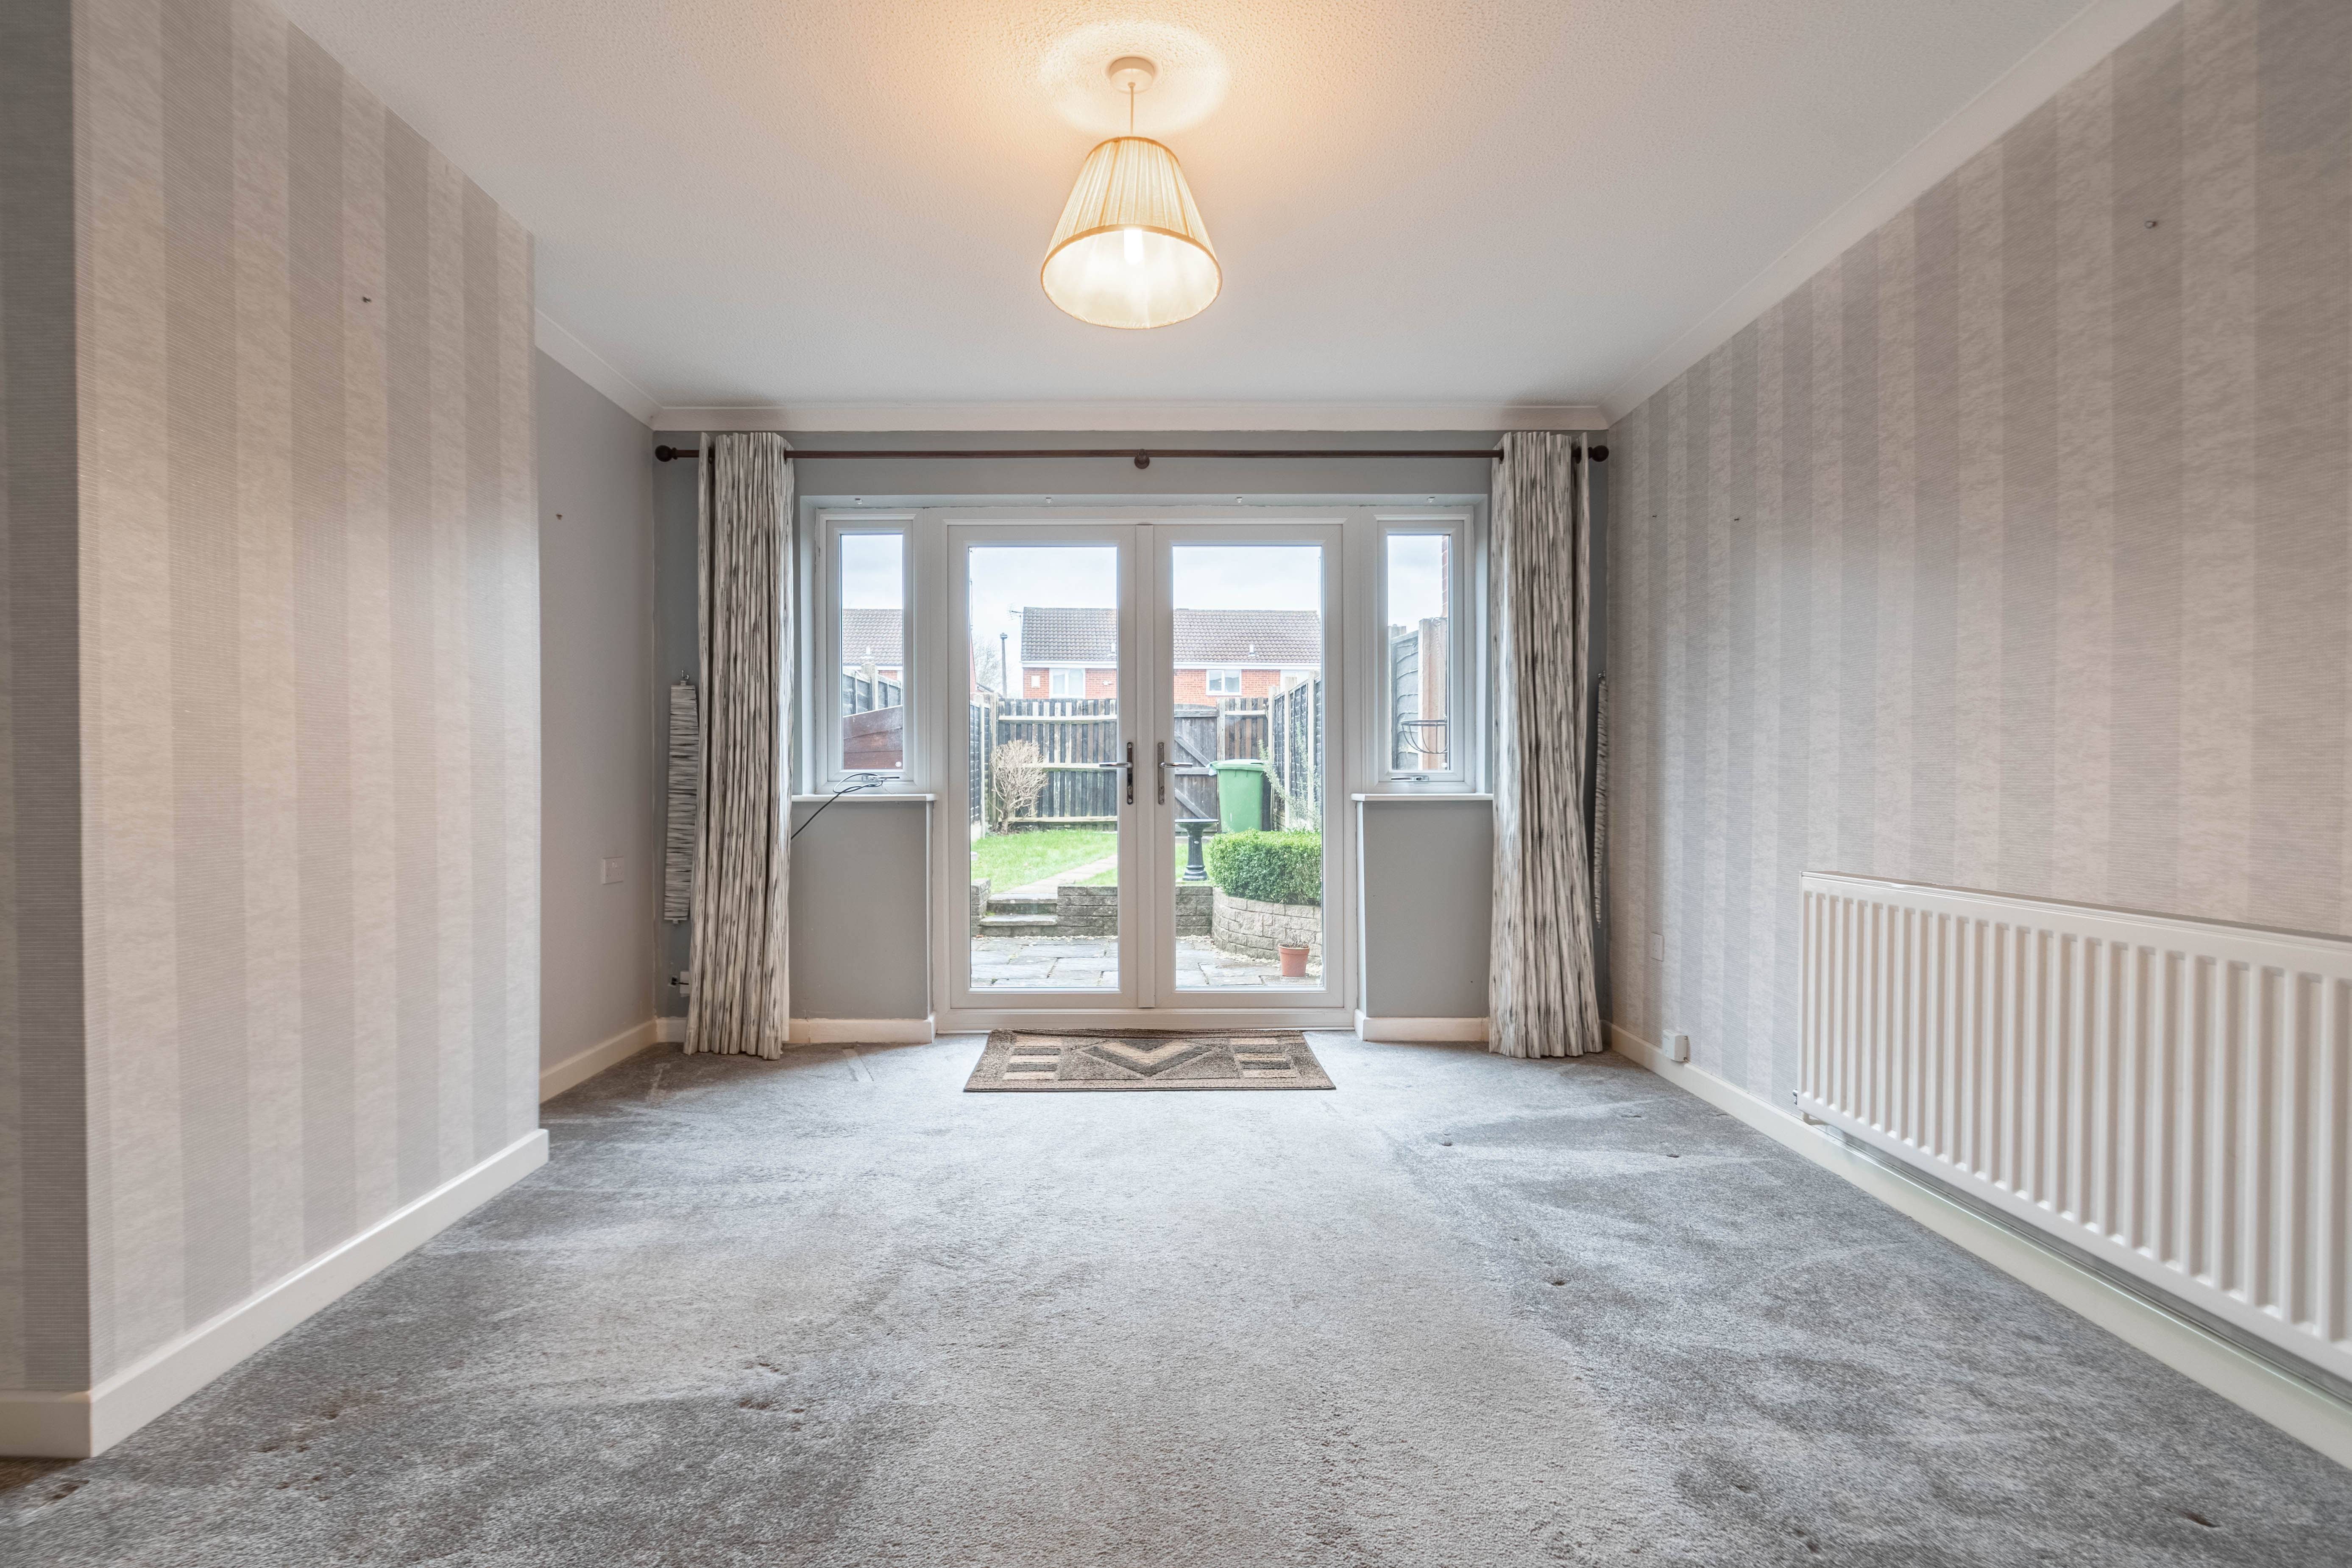 2 bed house for sale in Abbotswood Close, Winyates Green  - Property Image 7